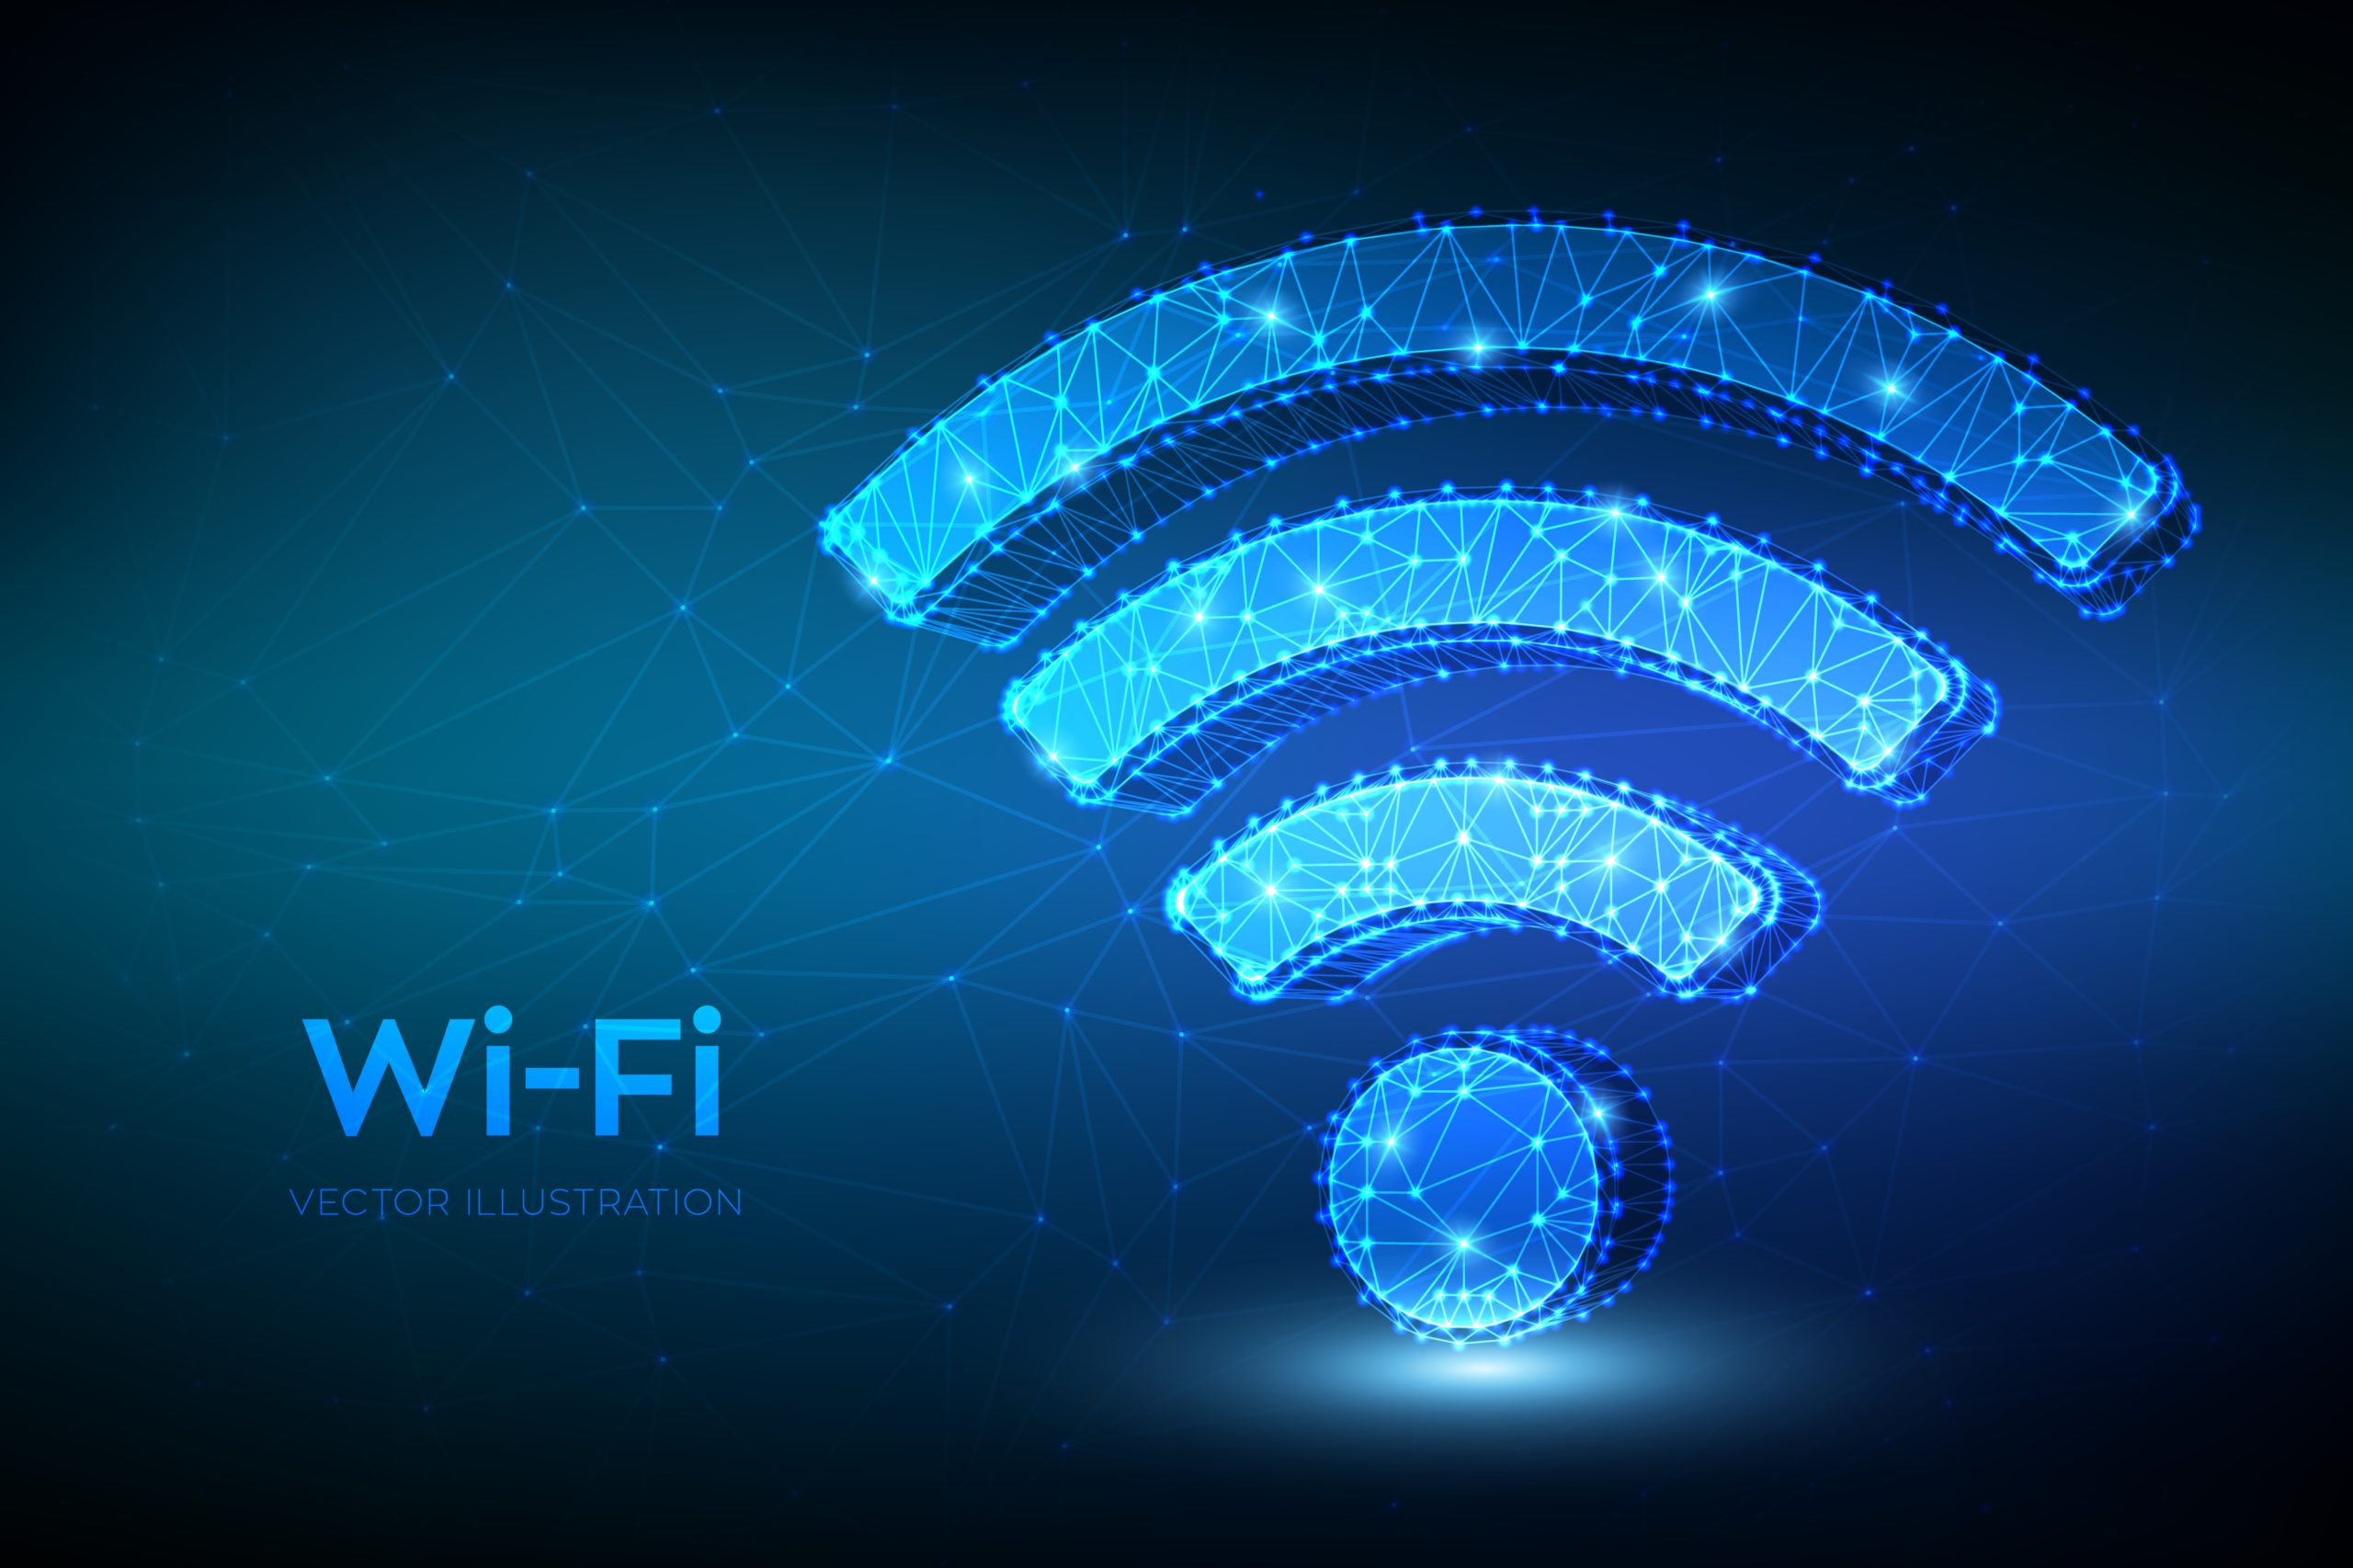 Everything You Should Know About the New Wi-Fi Driver for Android